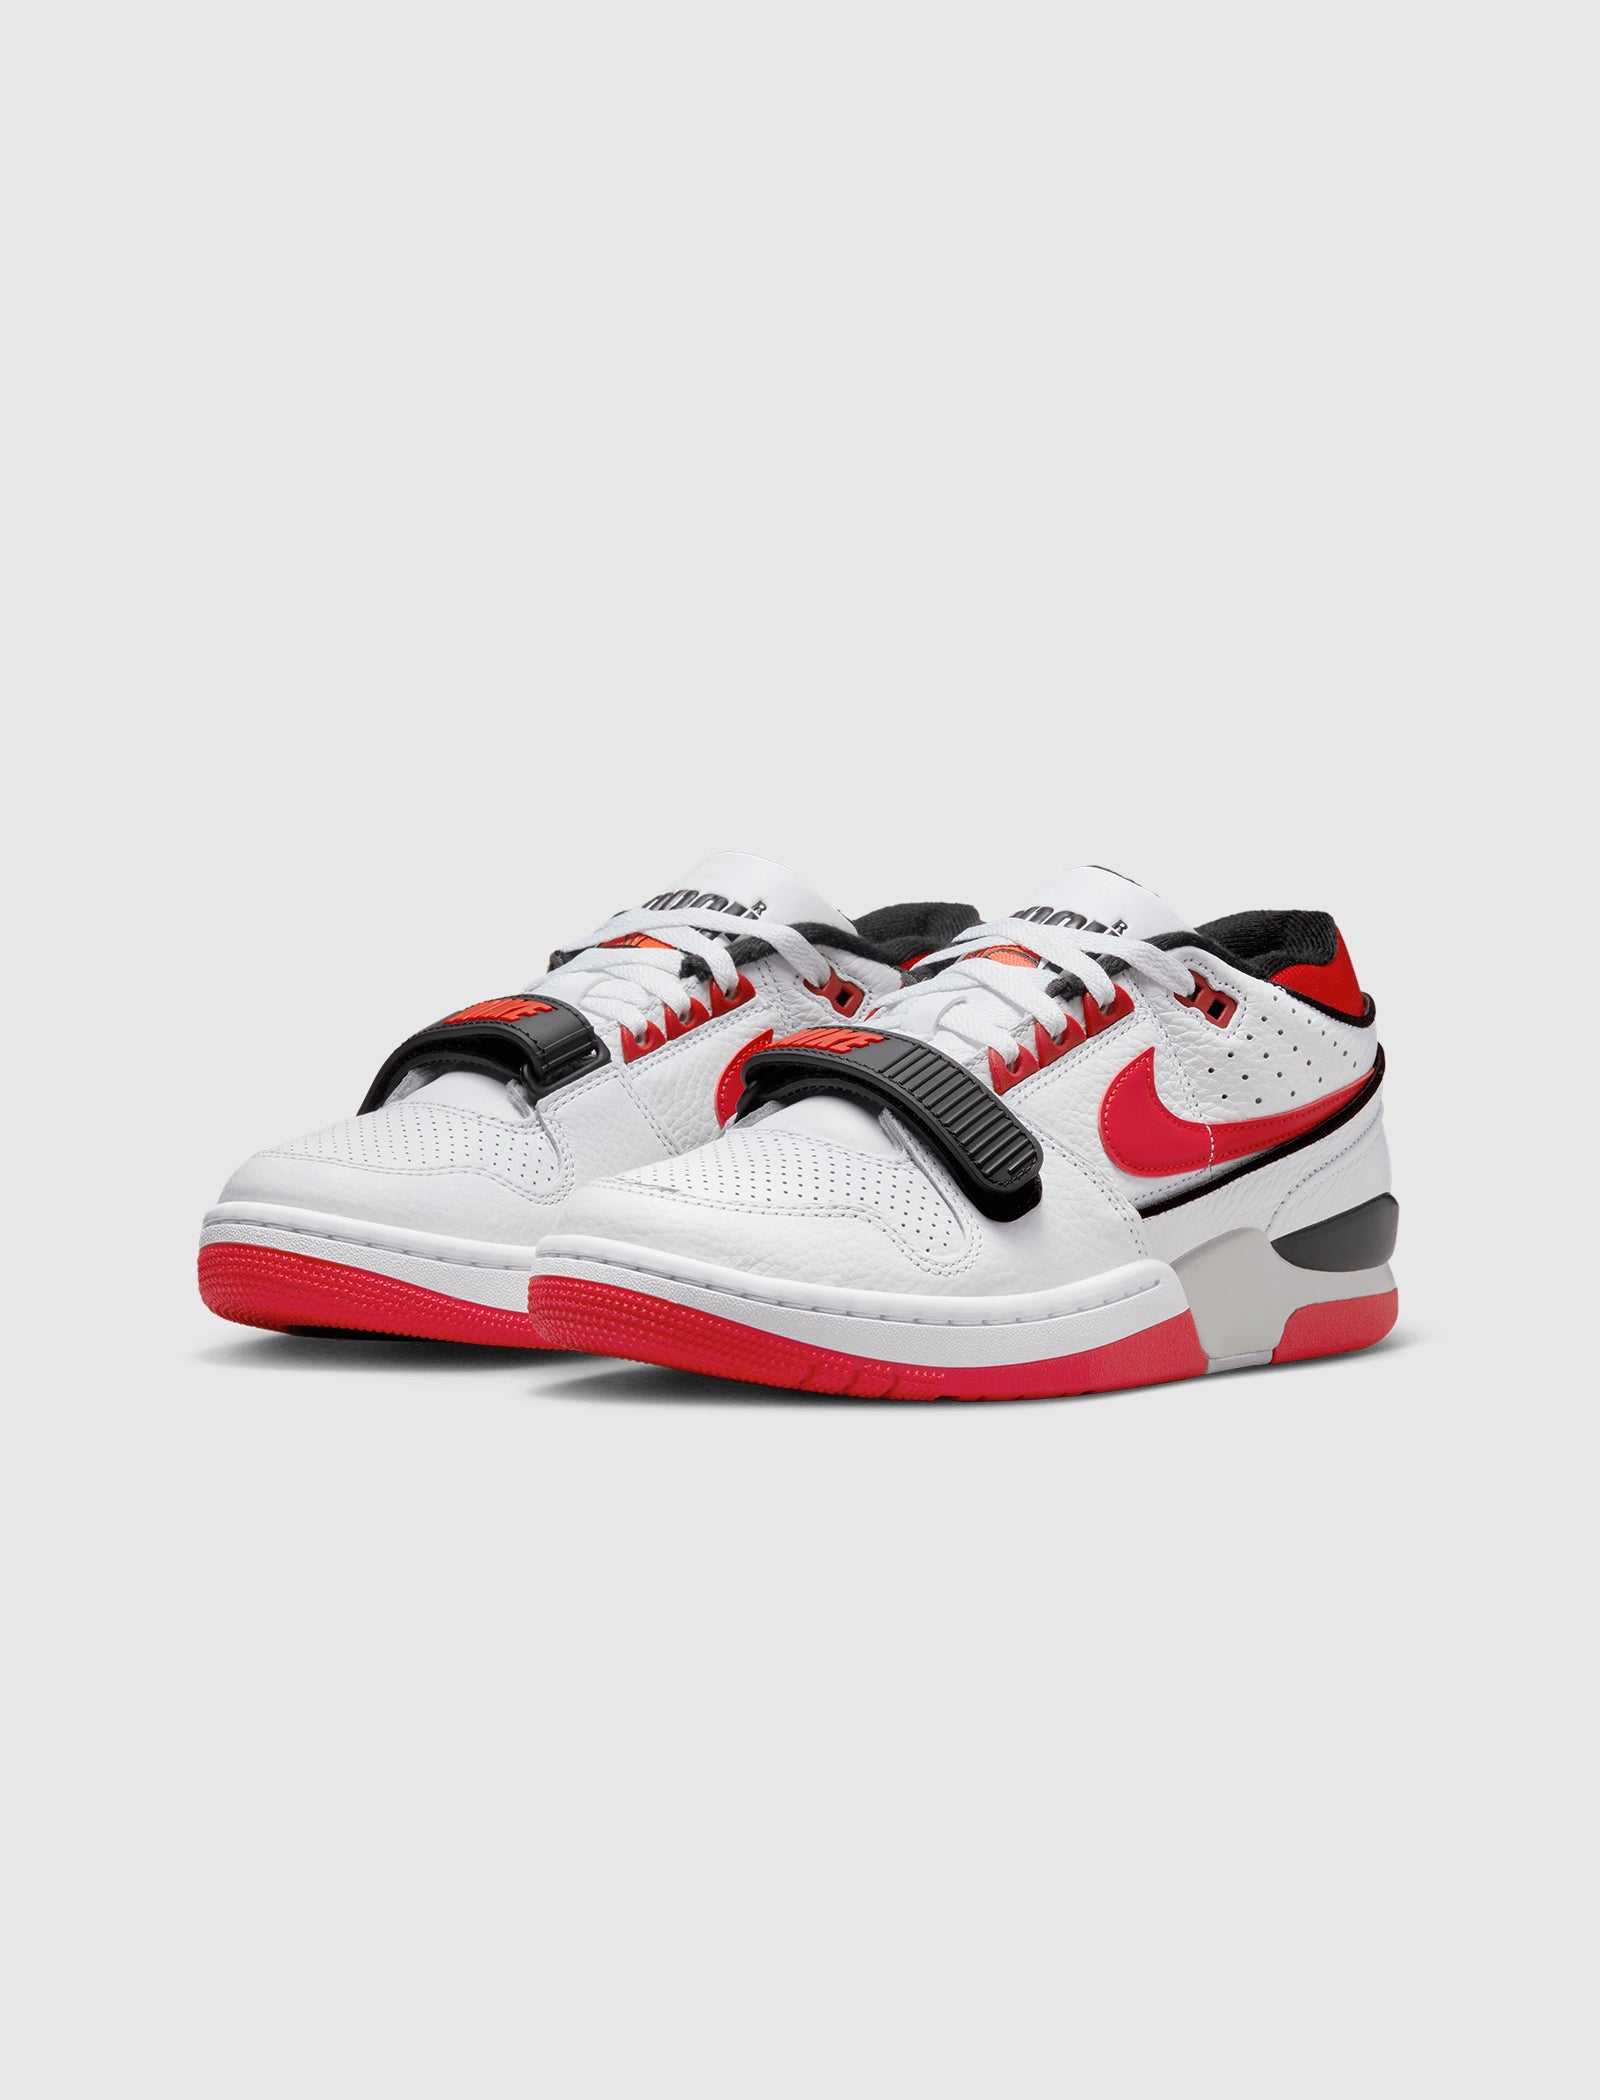 AIR ALPHA FORCE 88 "UNIVERSITY RED"